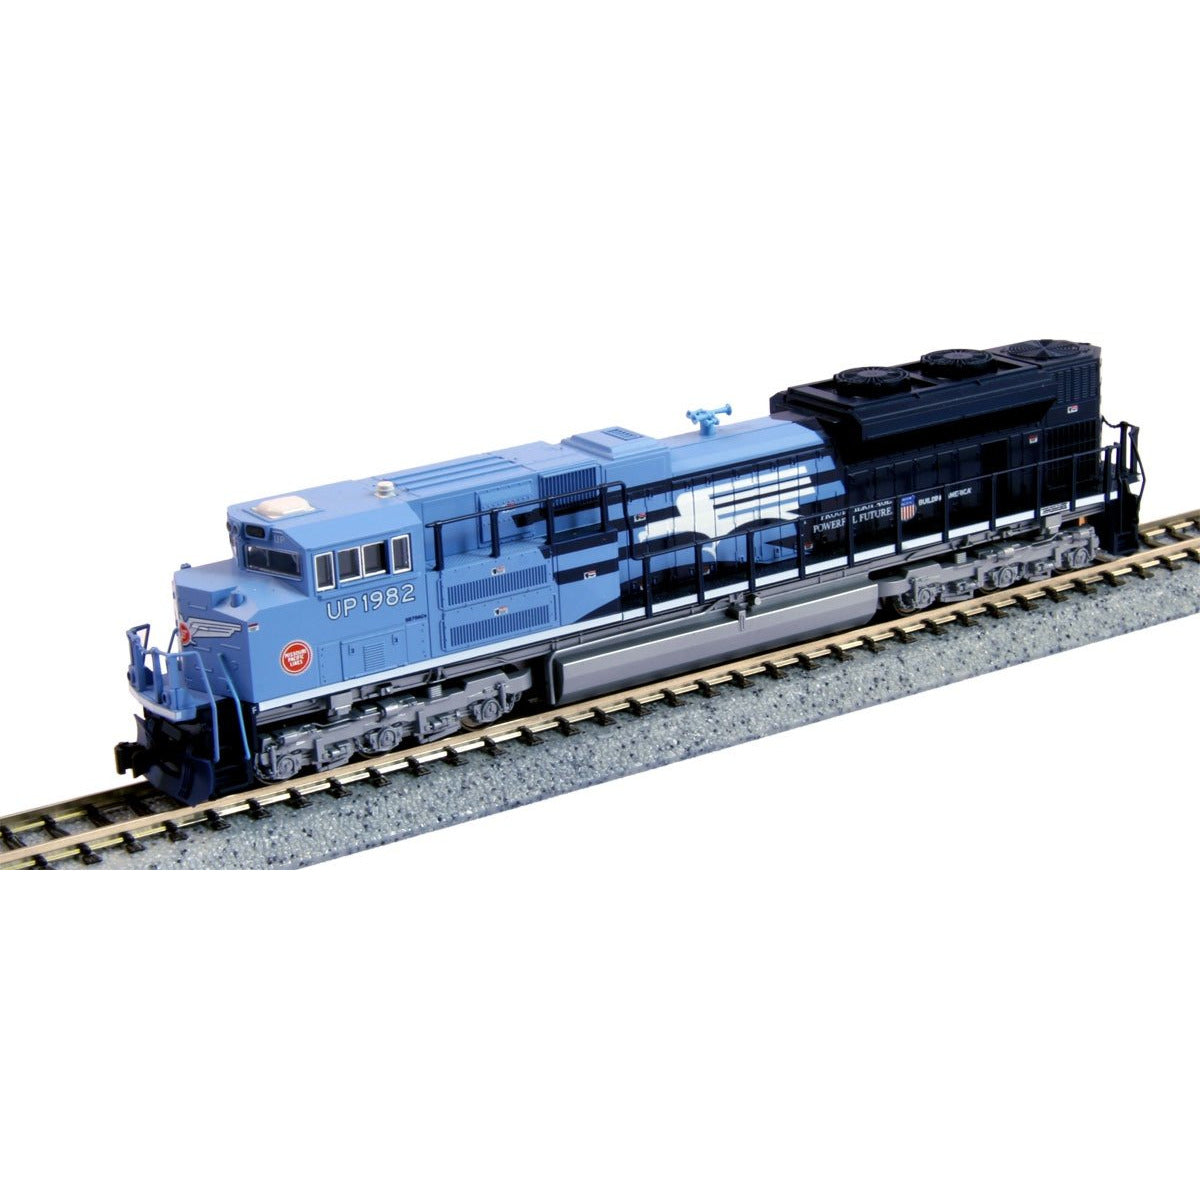 KATO N SD70 ACe UP 1982 MOPAC Heritage (PRE OWNED)